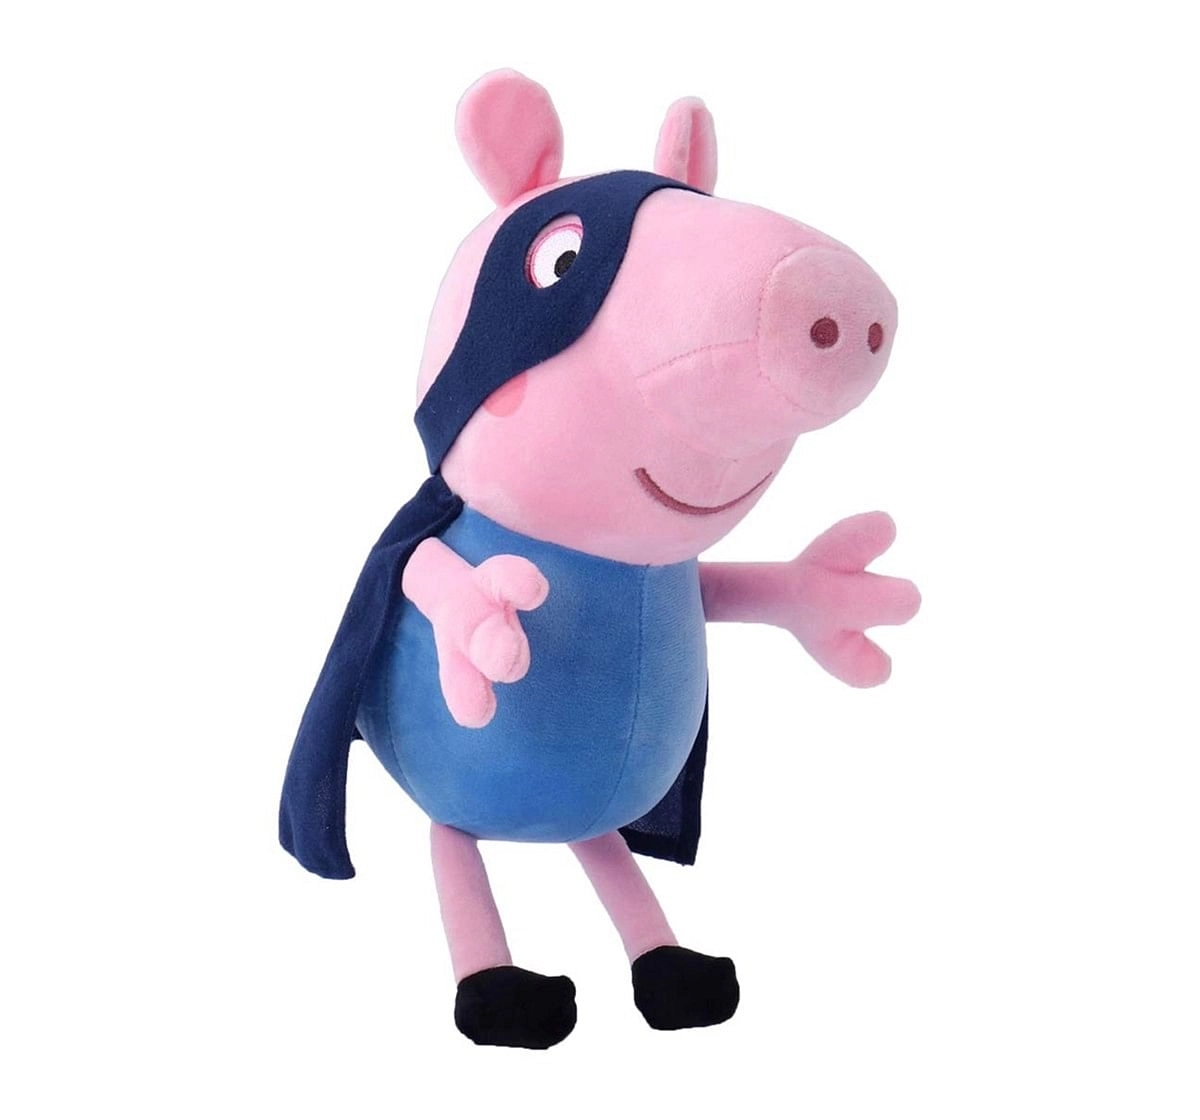 Peppa Pig George In Peter Pan Costume Soft Toy for Kids age 1Y+ - 30 Cm 